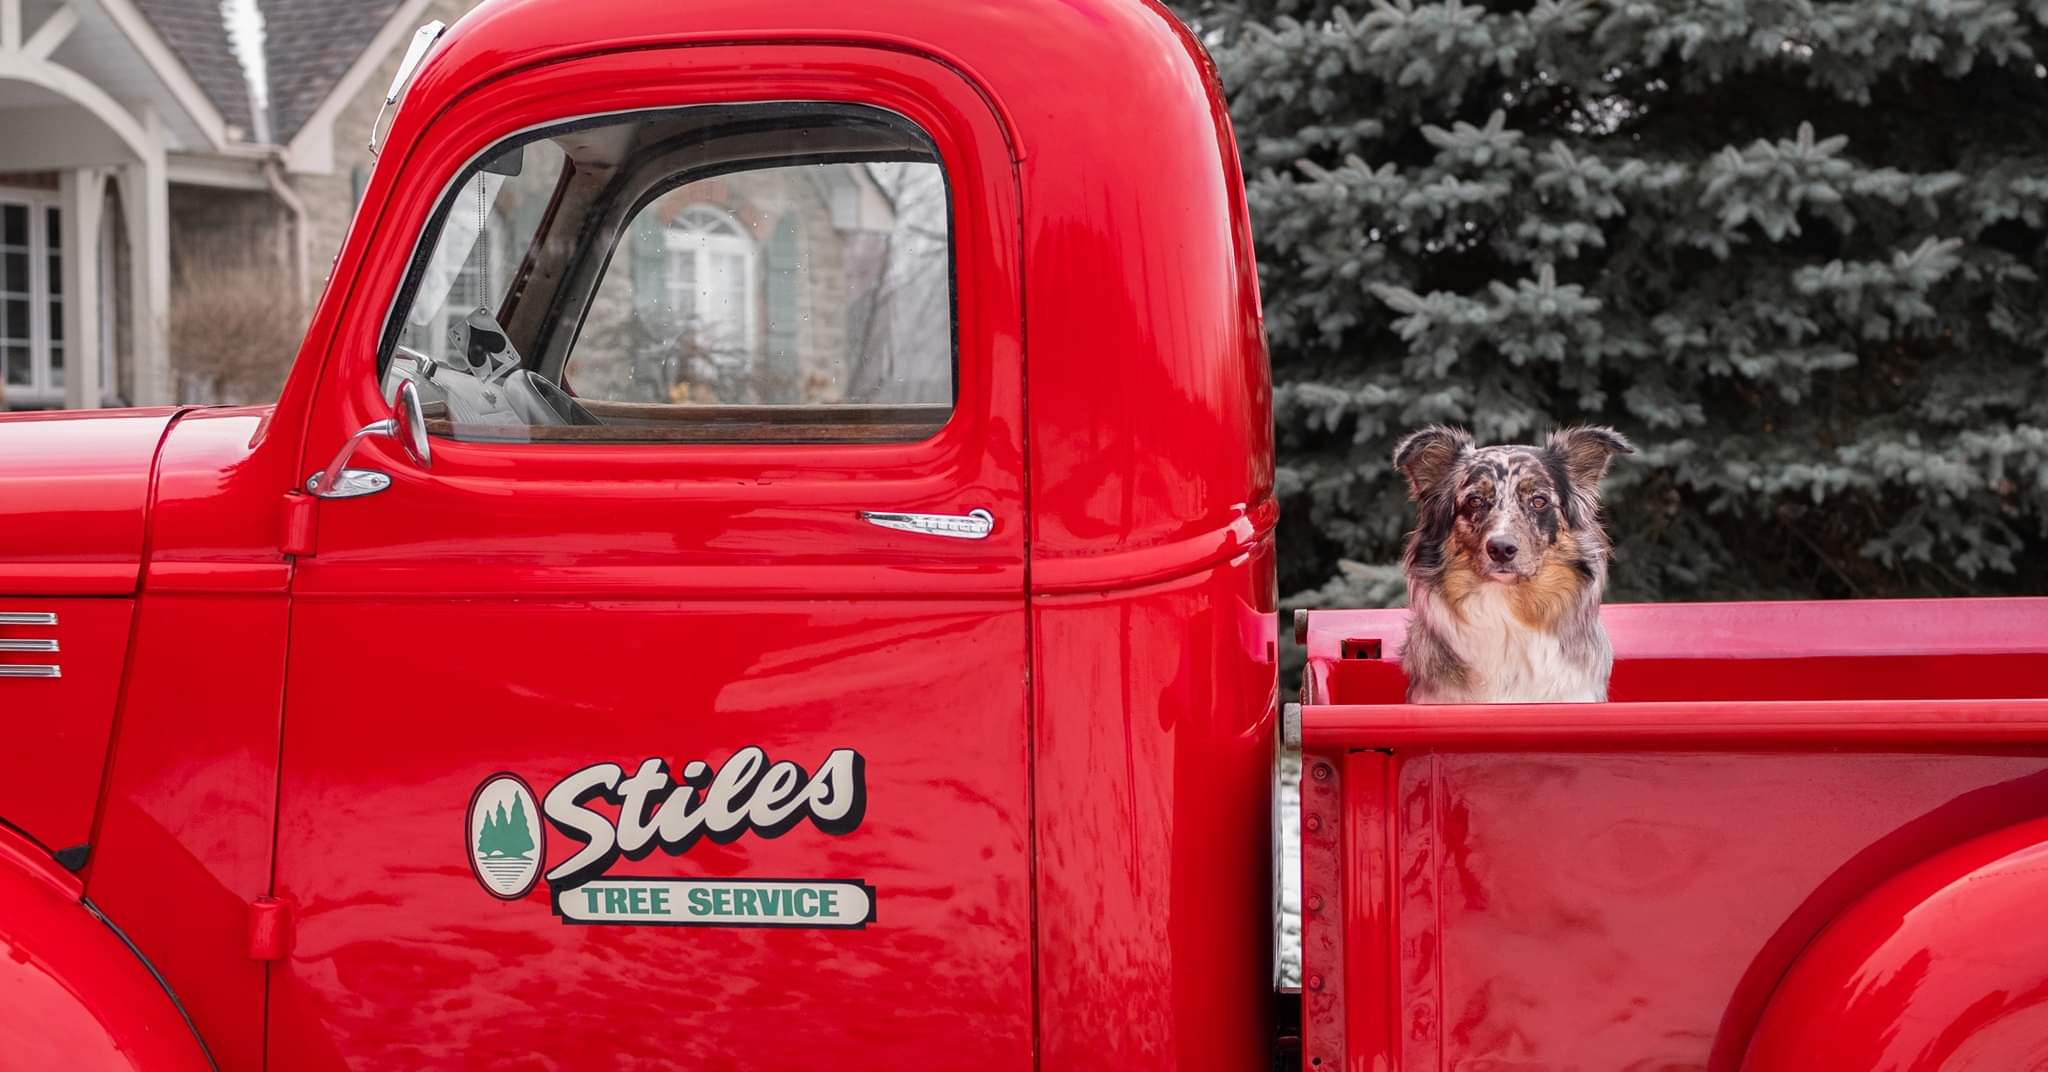 Stiles Tree Service truck with dog in cab